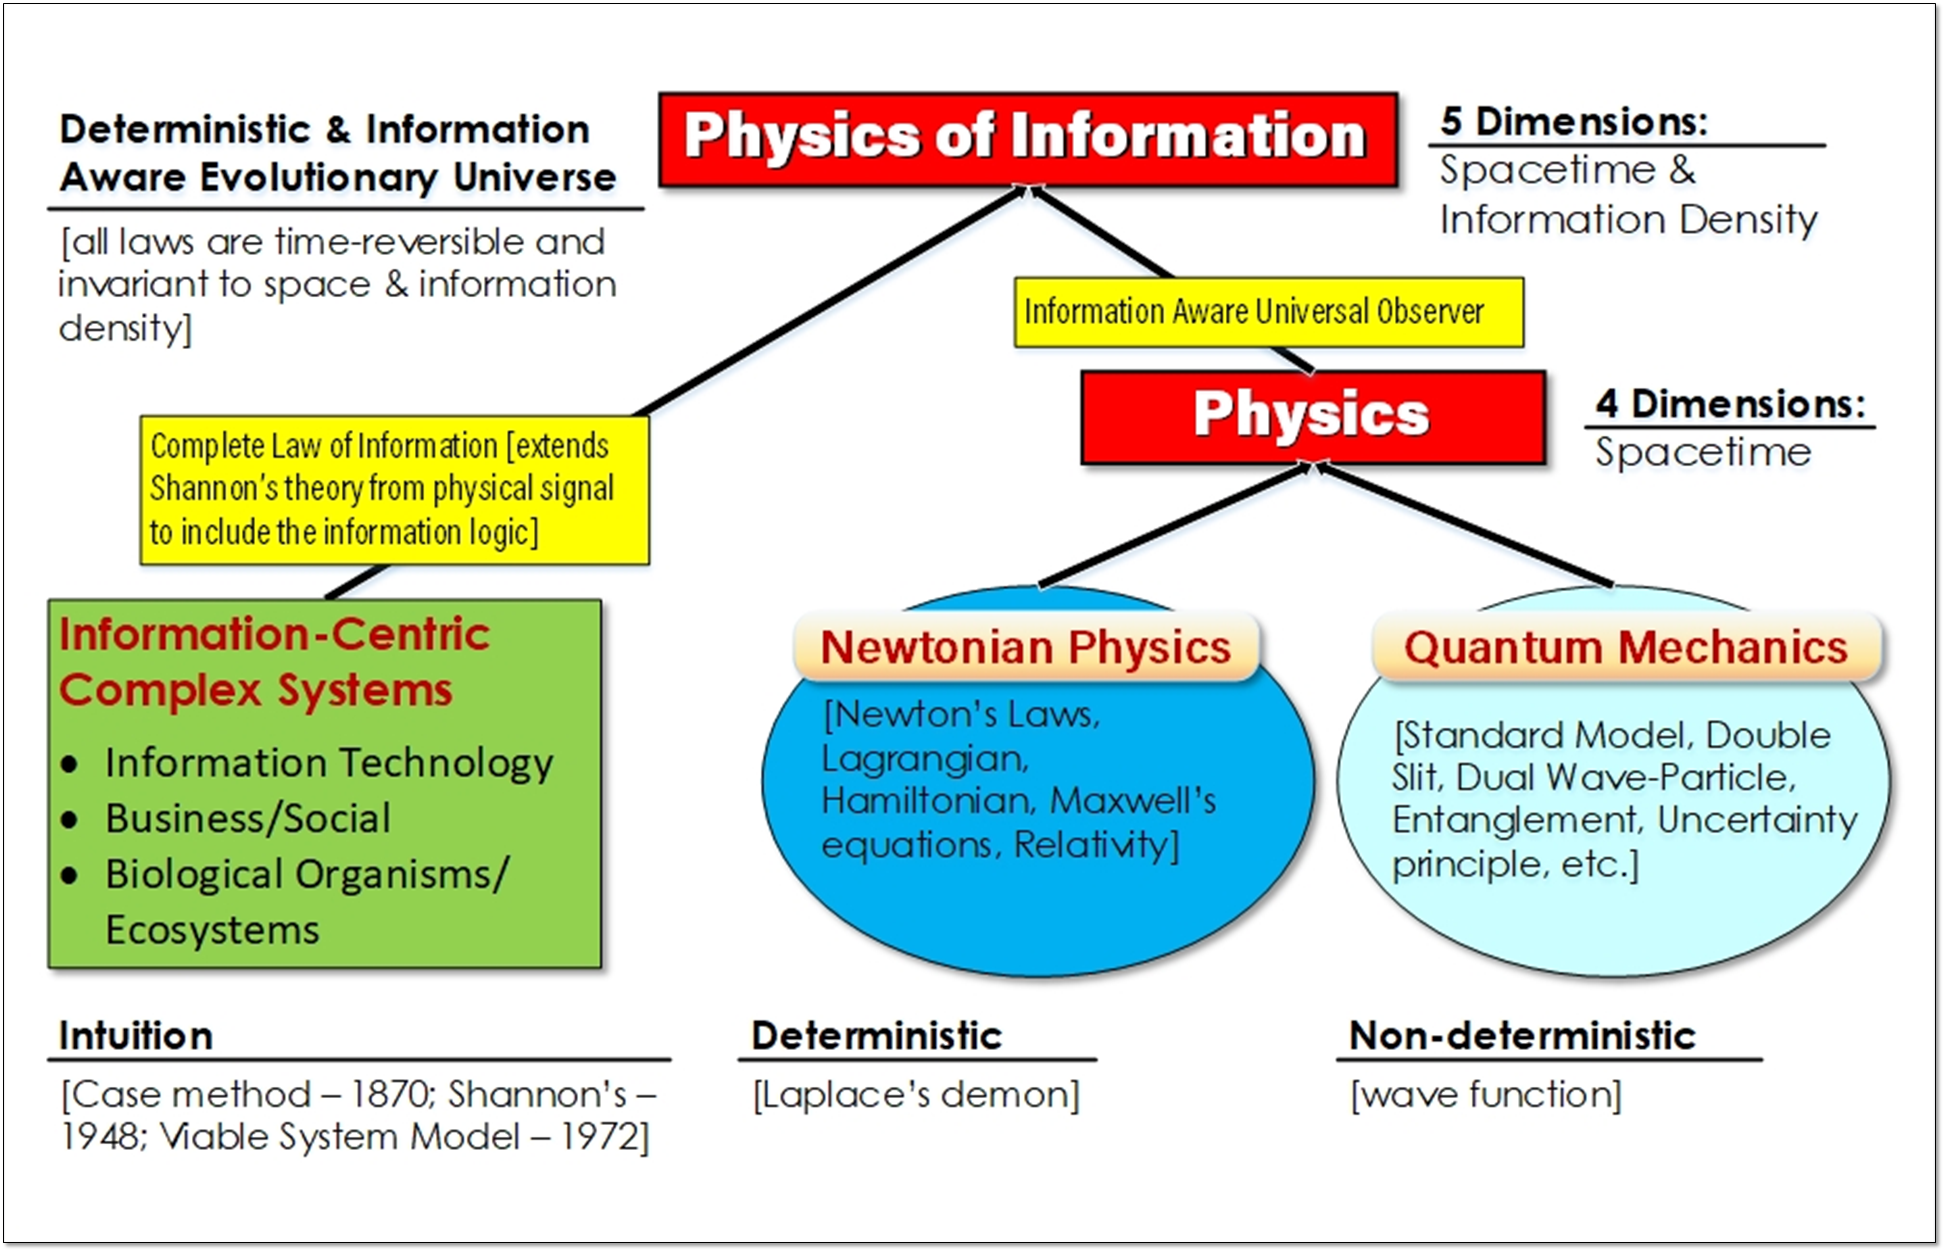 Physics of Information